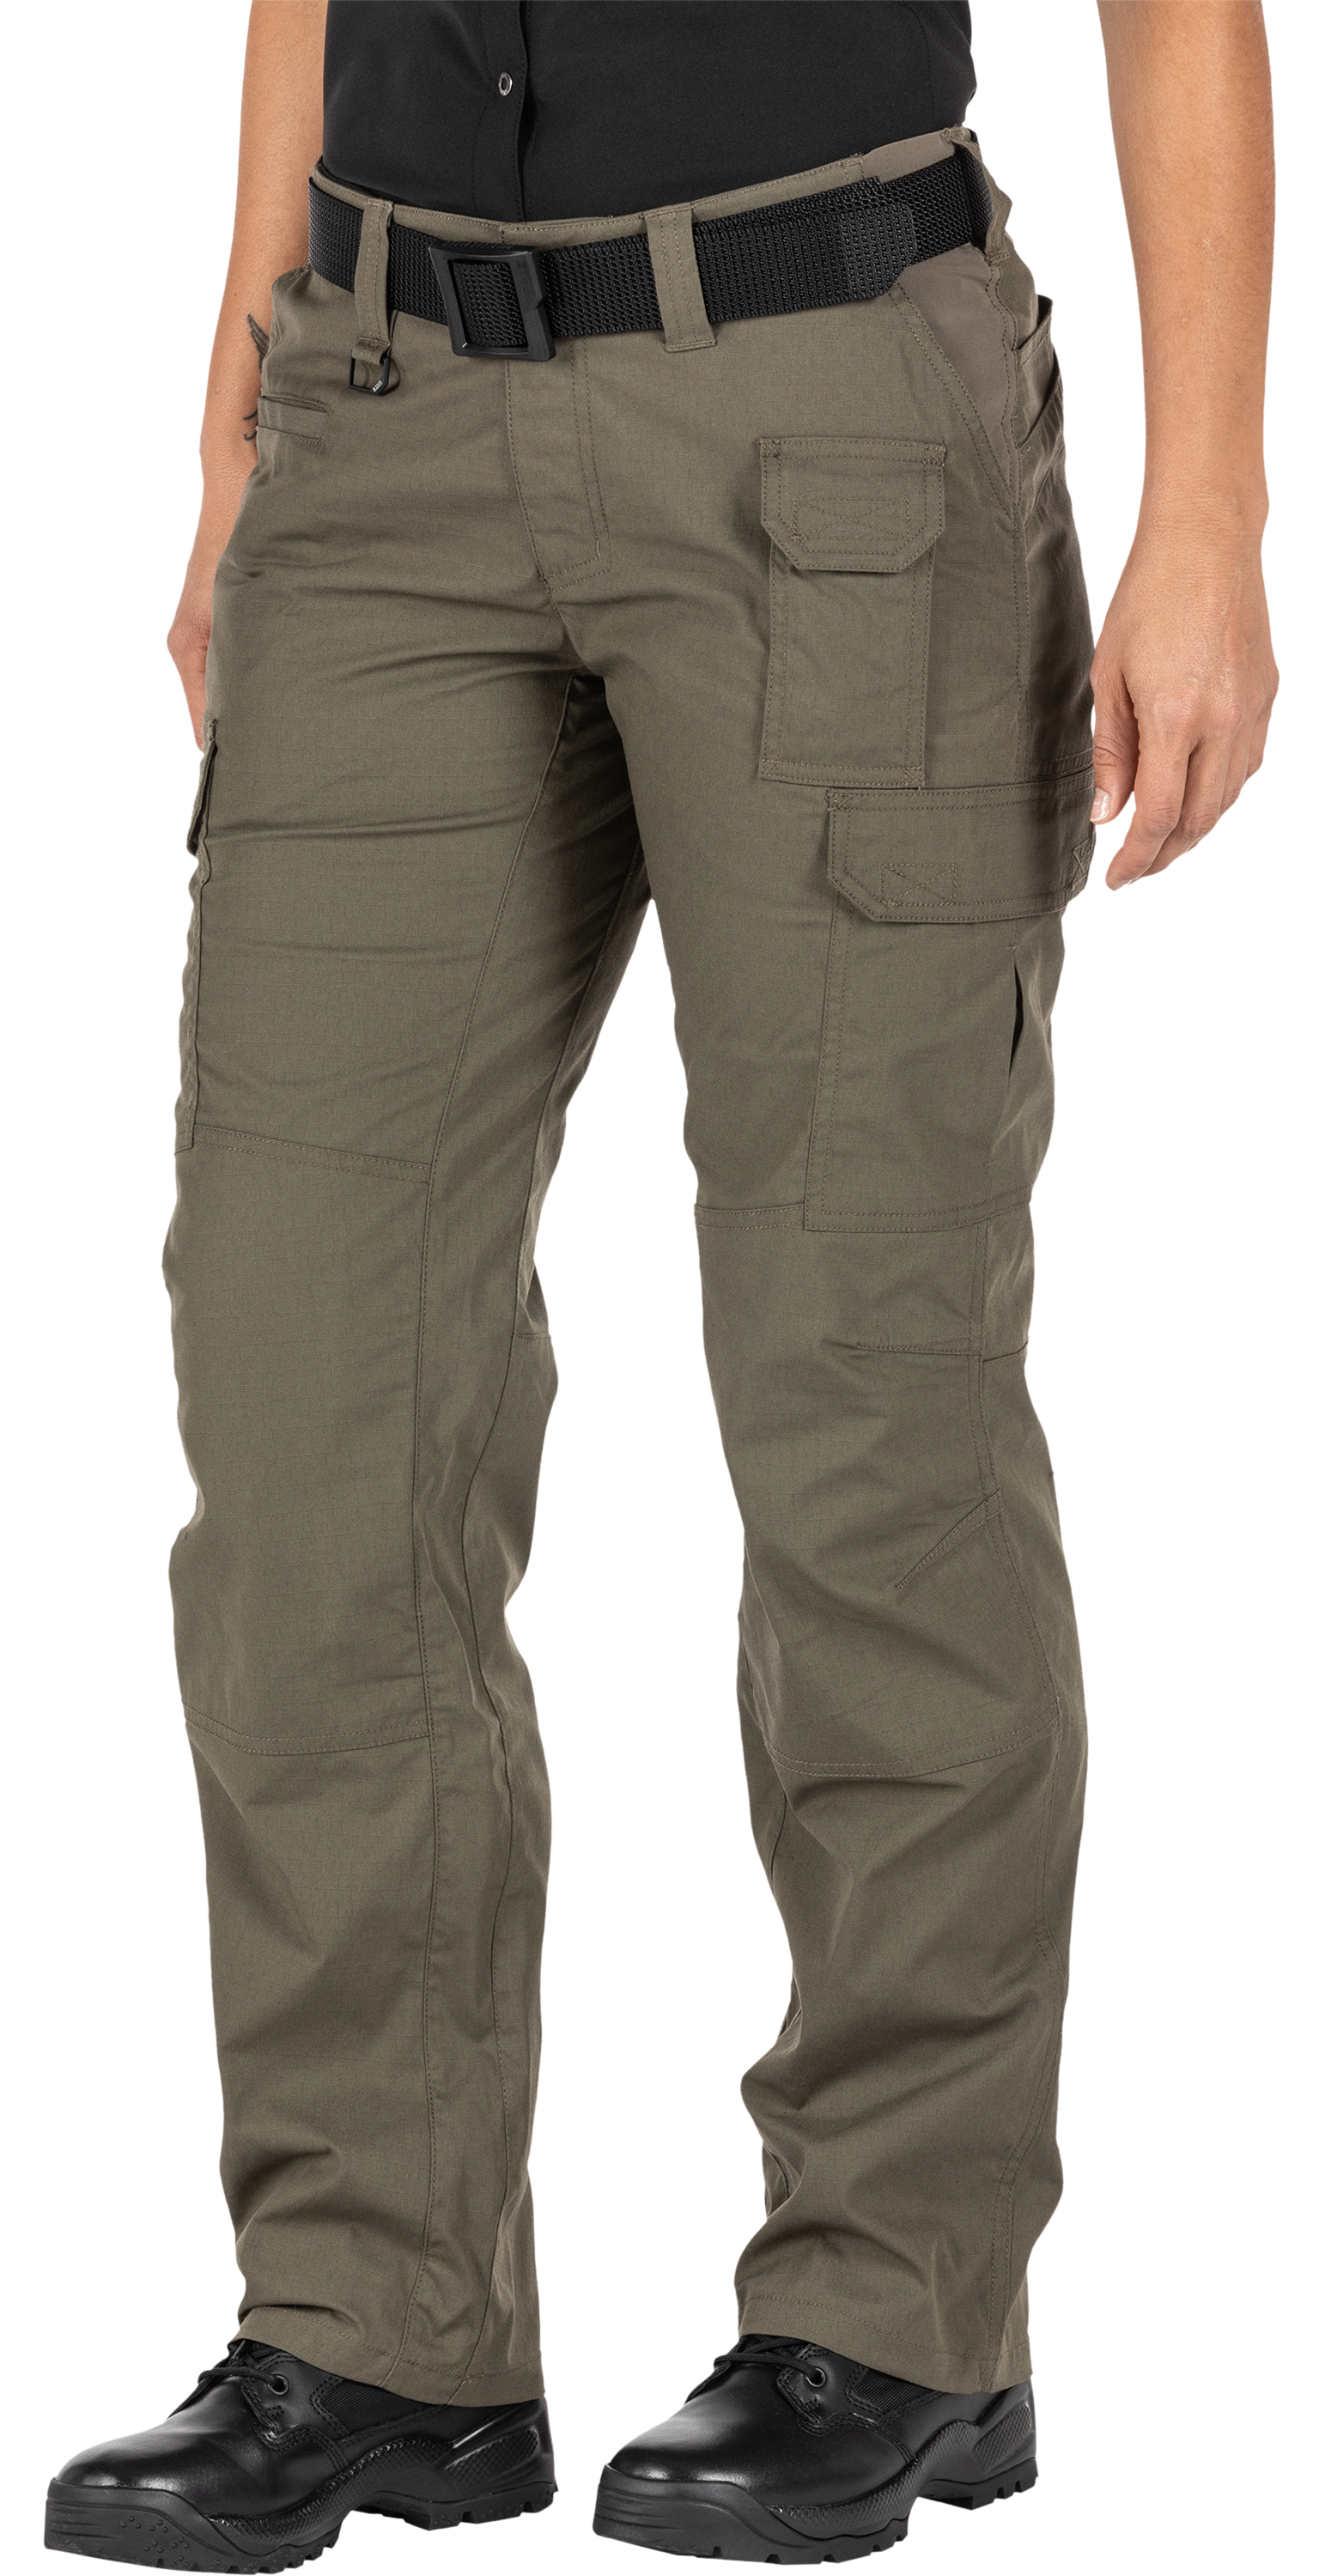 5.11 Tactical Pants for Ladies